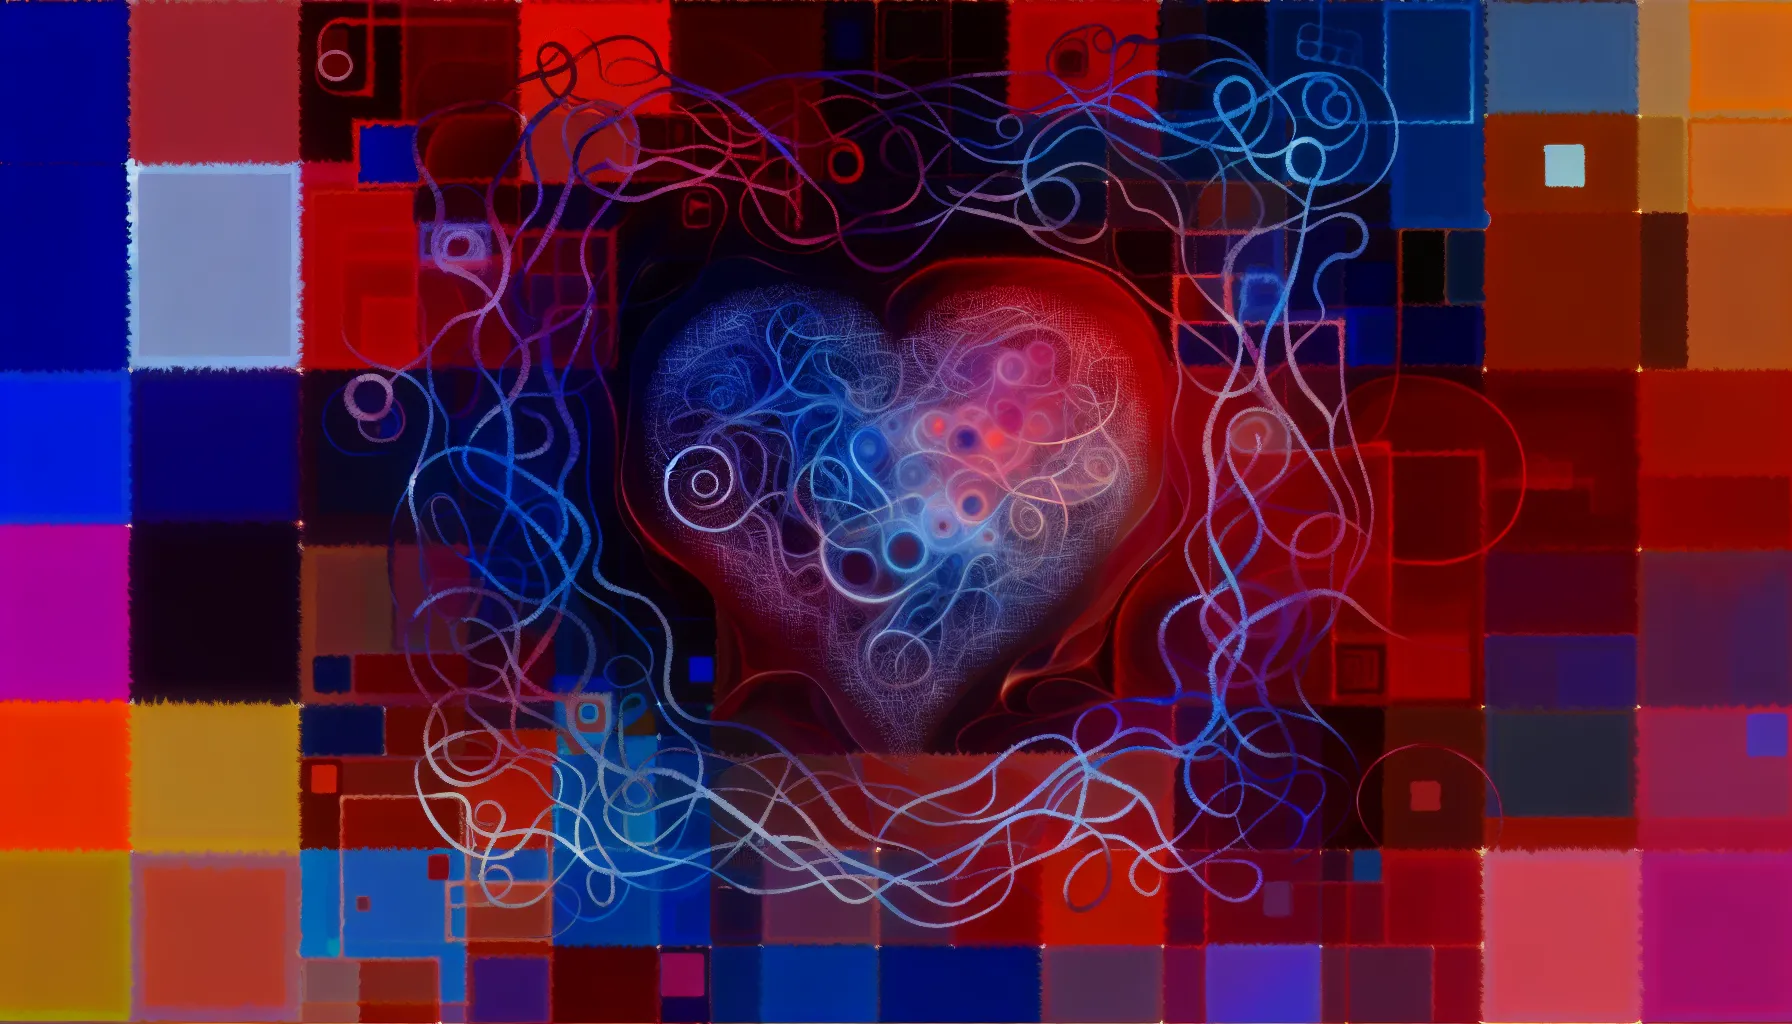 <strong>Within the Labyrinth of Love</strong>: Each line and curve in this abstract tapestry represents the multifarious pathways through which a man's heart ventures, seeking the resonance of true connection.